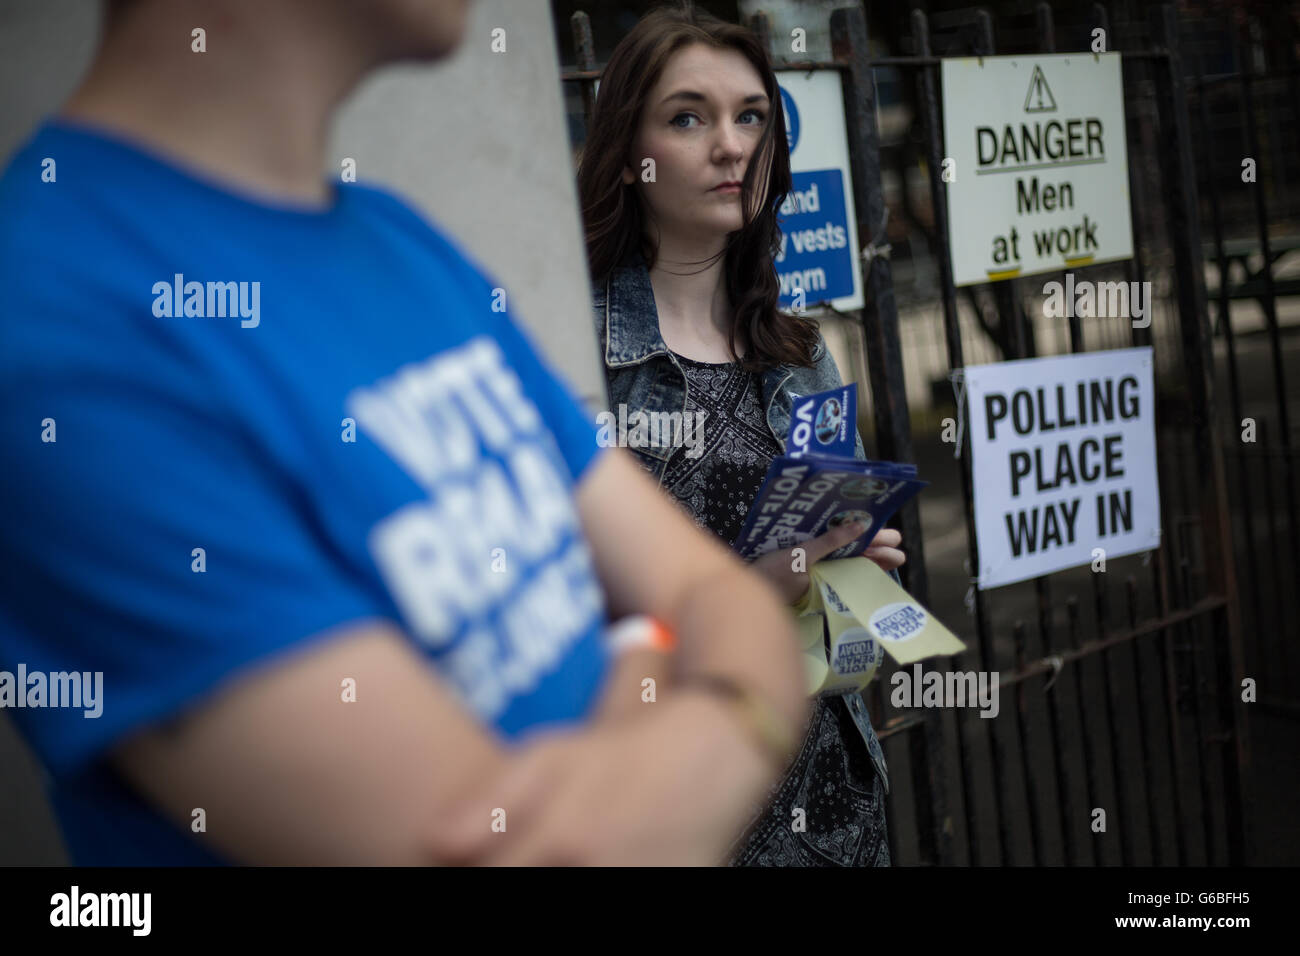 Glasgow, UK. 23rd June, 2016. 'Remain' campaigners, Patrick Bourke (foreground) and Emma Russell, stand distributing leaflets, as voting takes place on the United Kingdom's referendum on European Union membership, outside the Hyndland Primary School voting station in Partick, in Glasgow, Scotland, on 23 June 2016. Credit:  jeremy sutton-hibbert/Alamy Live News Stock Photo